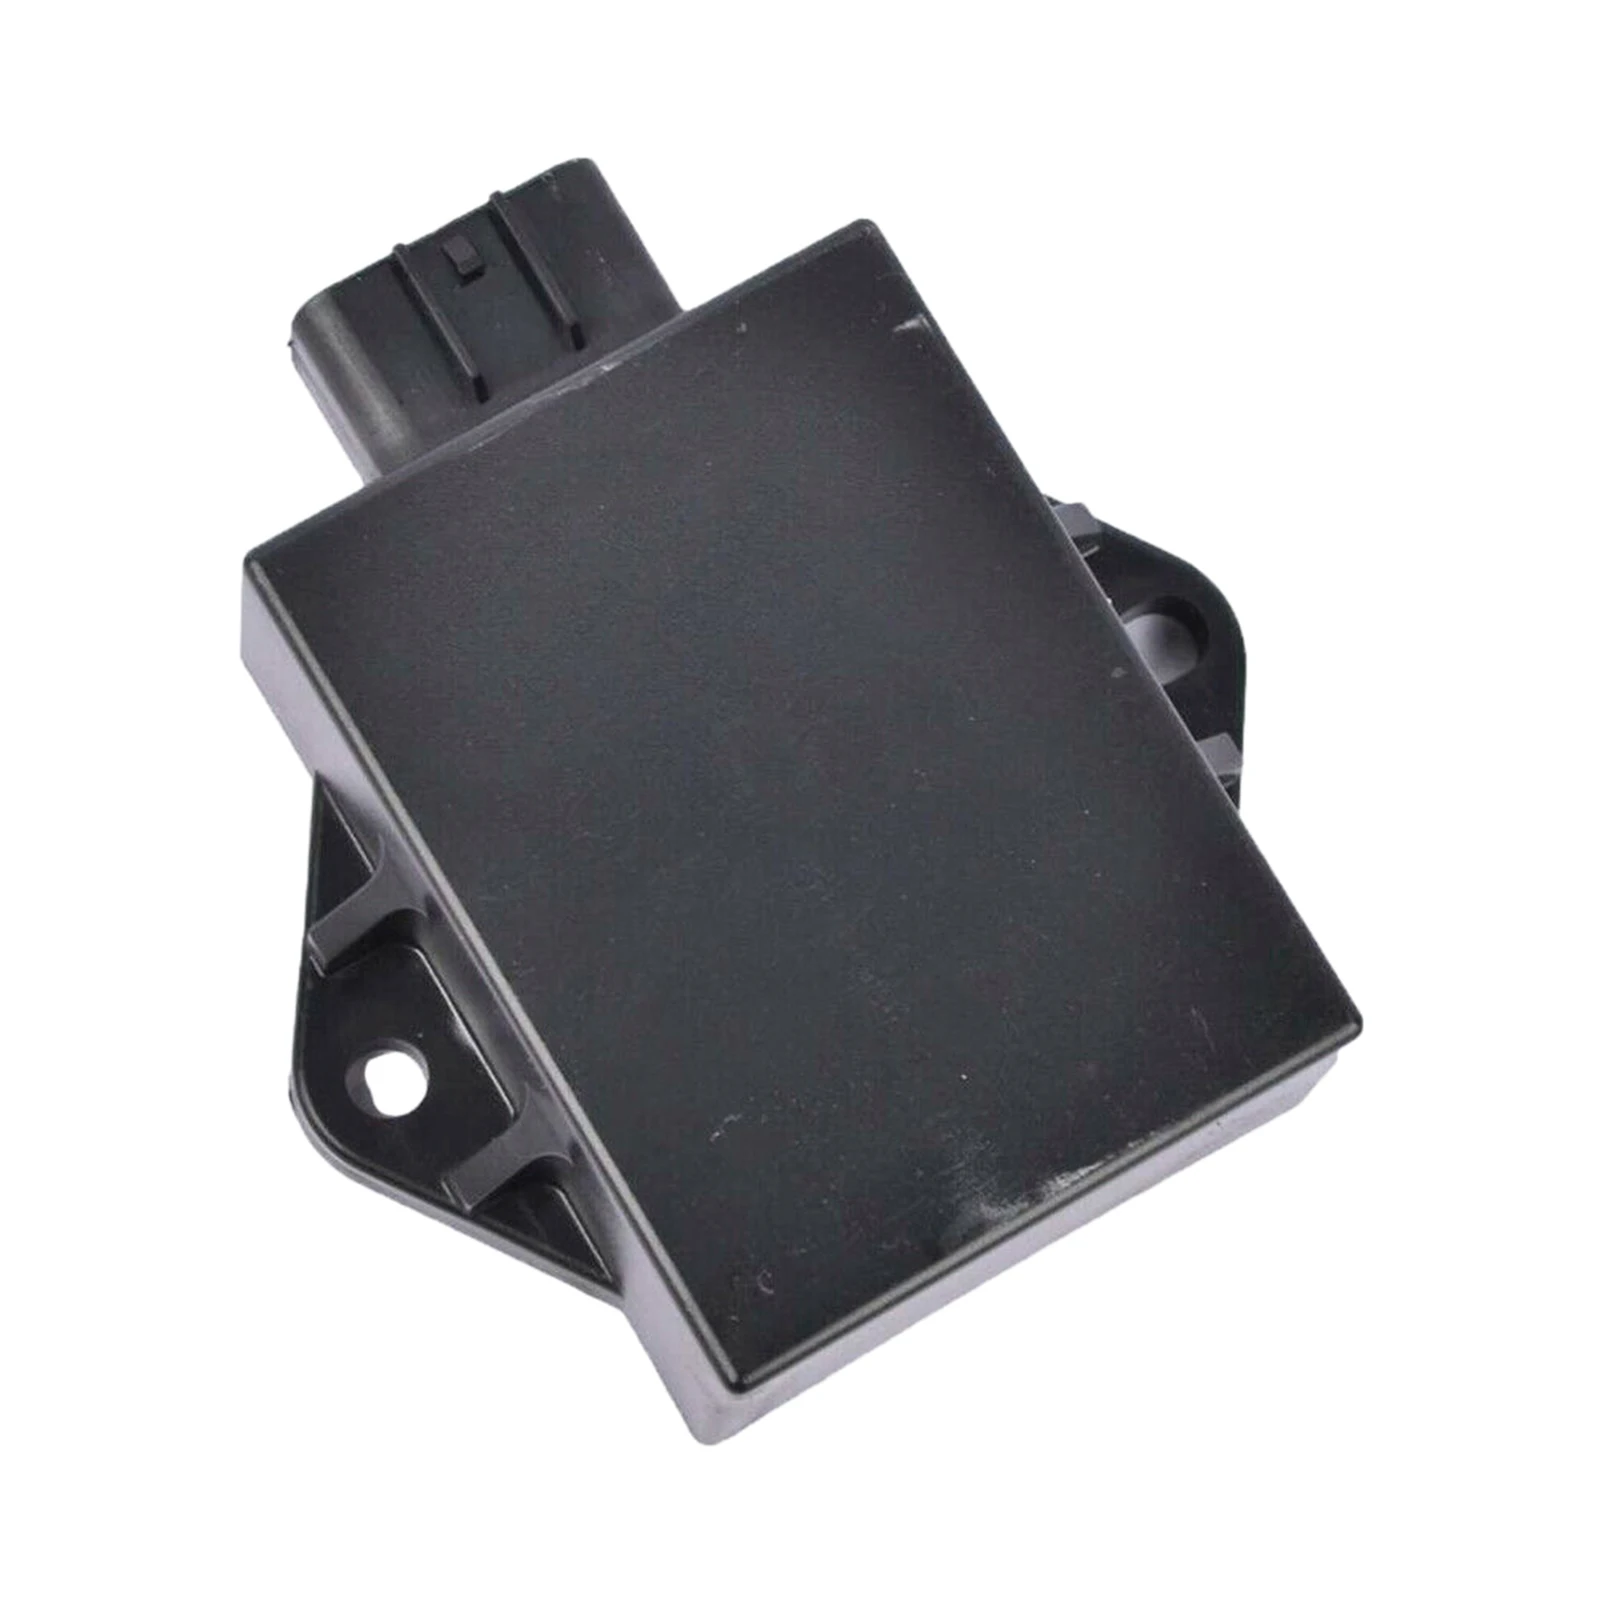 Ignitor CDI Box CDI Box Replacement Fit For Polaris Predator 500 2003 2004 OEM3088052 Motorcycle Accessories